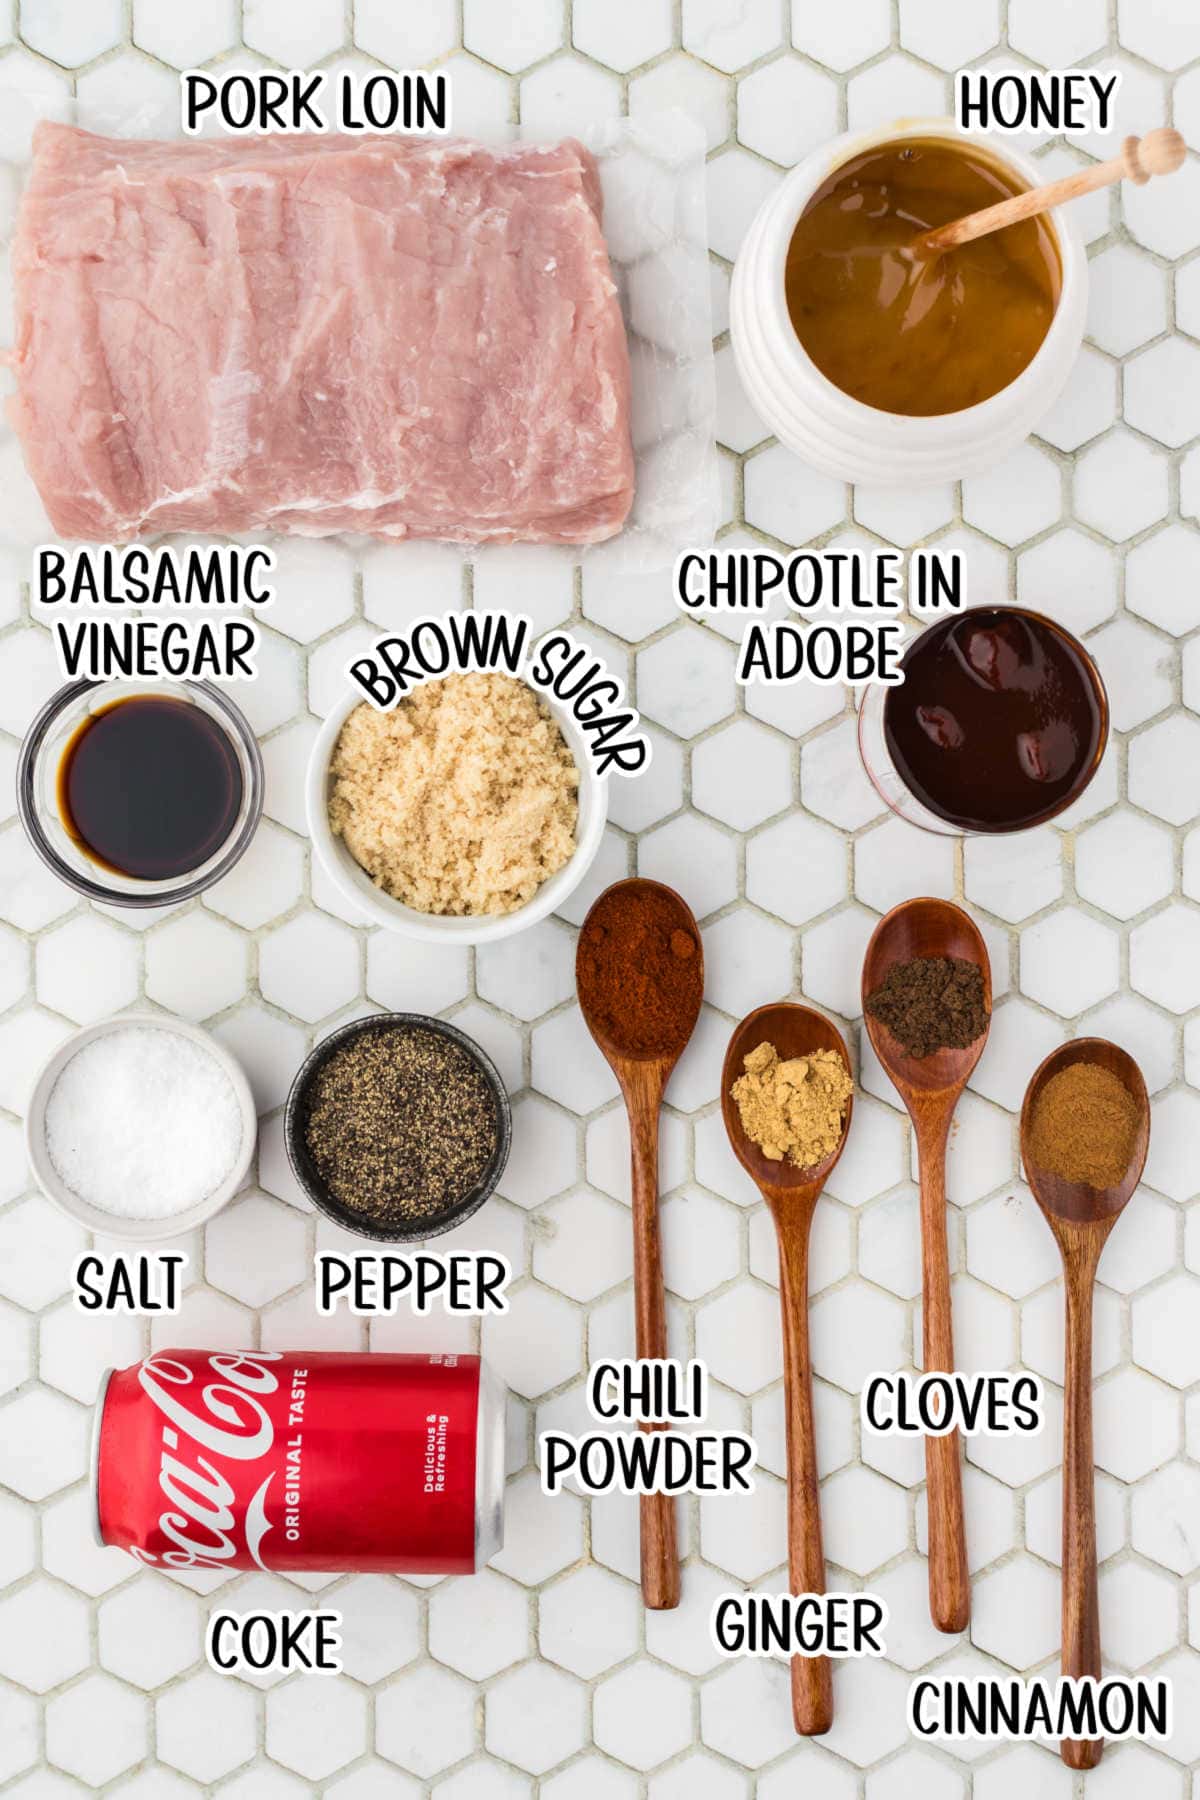 Labeled ingredients for the coca cola pork loin.